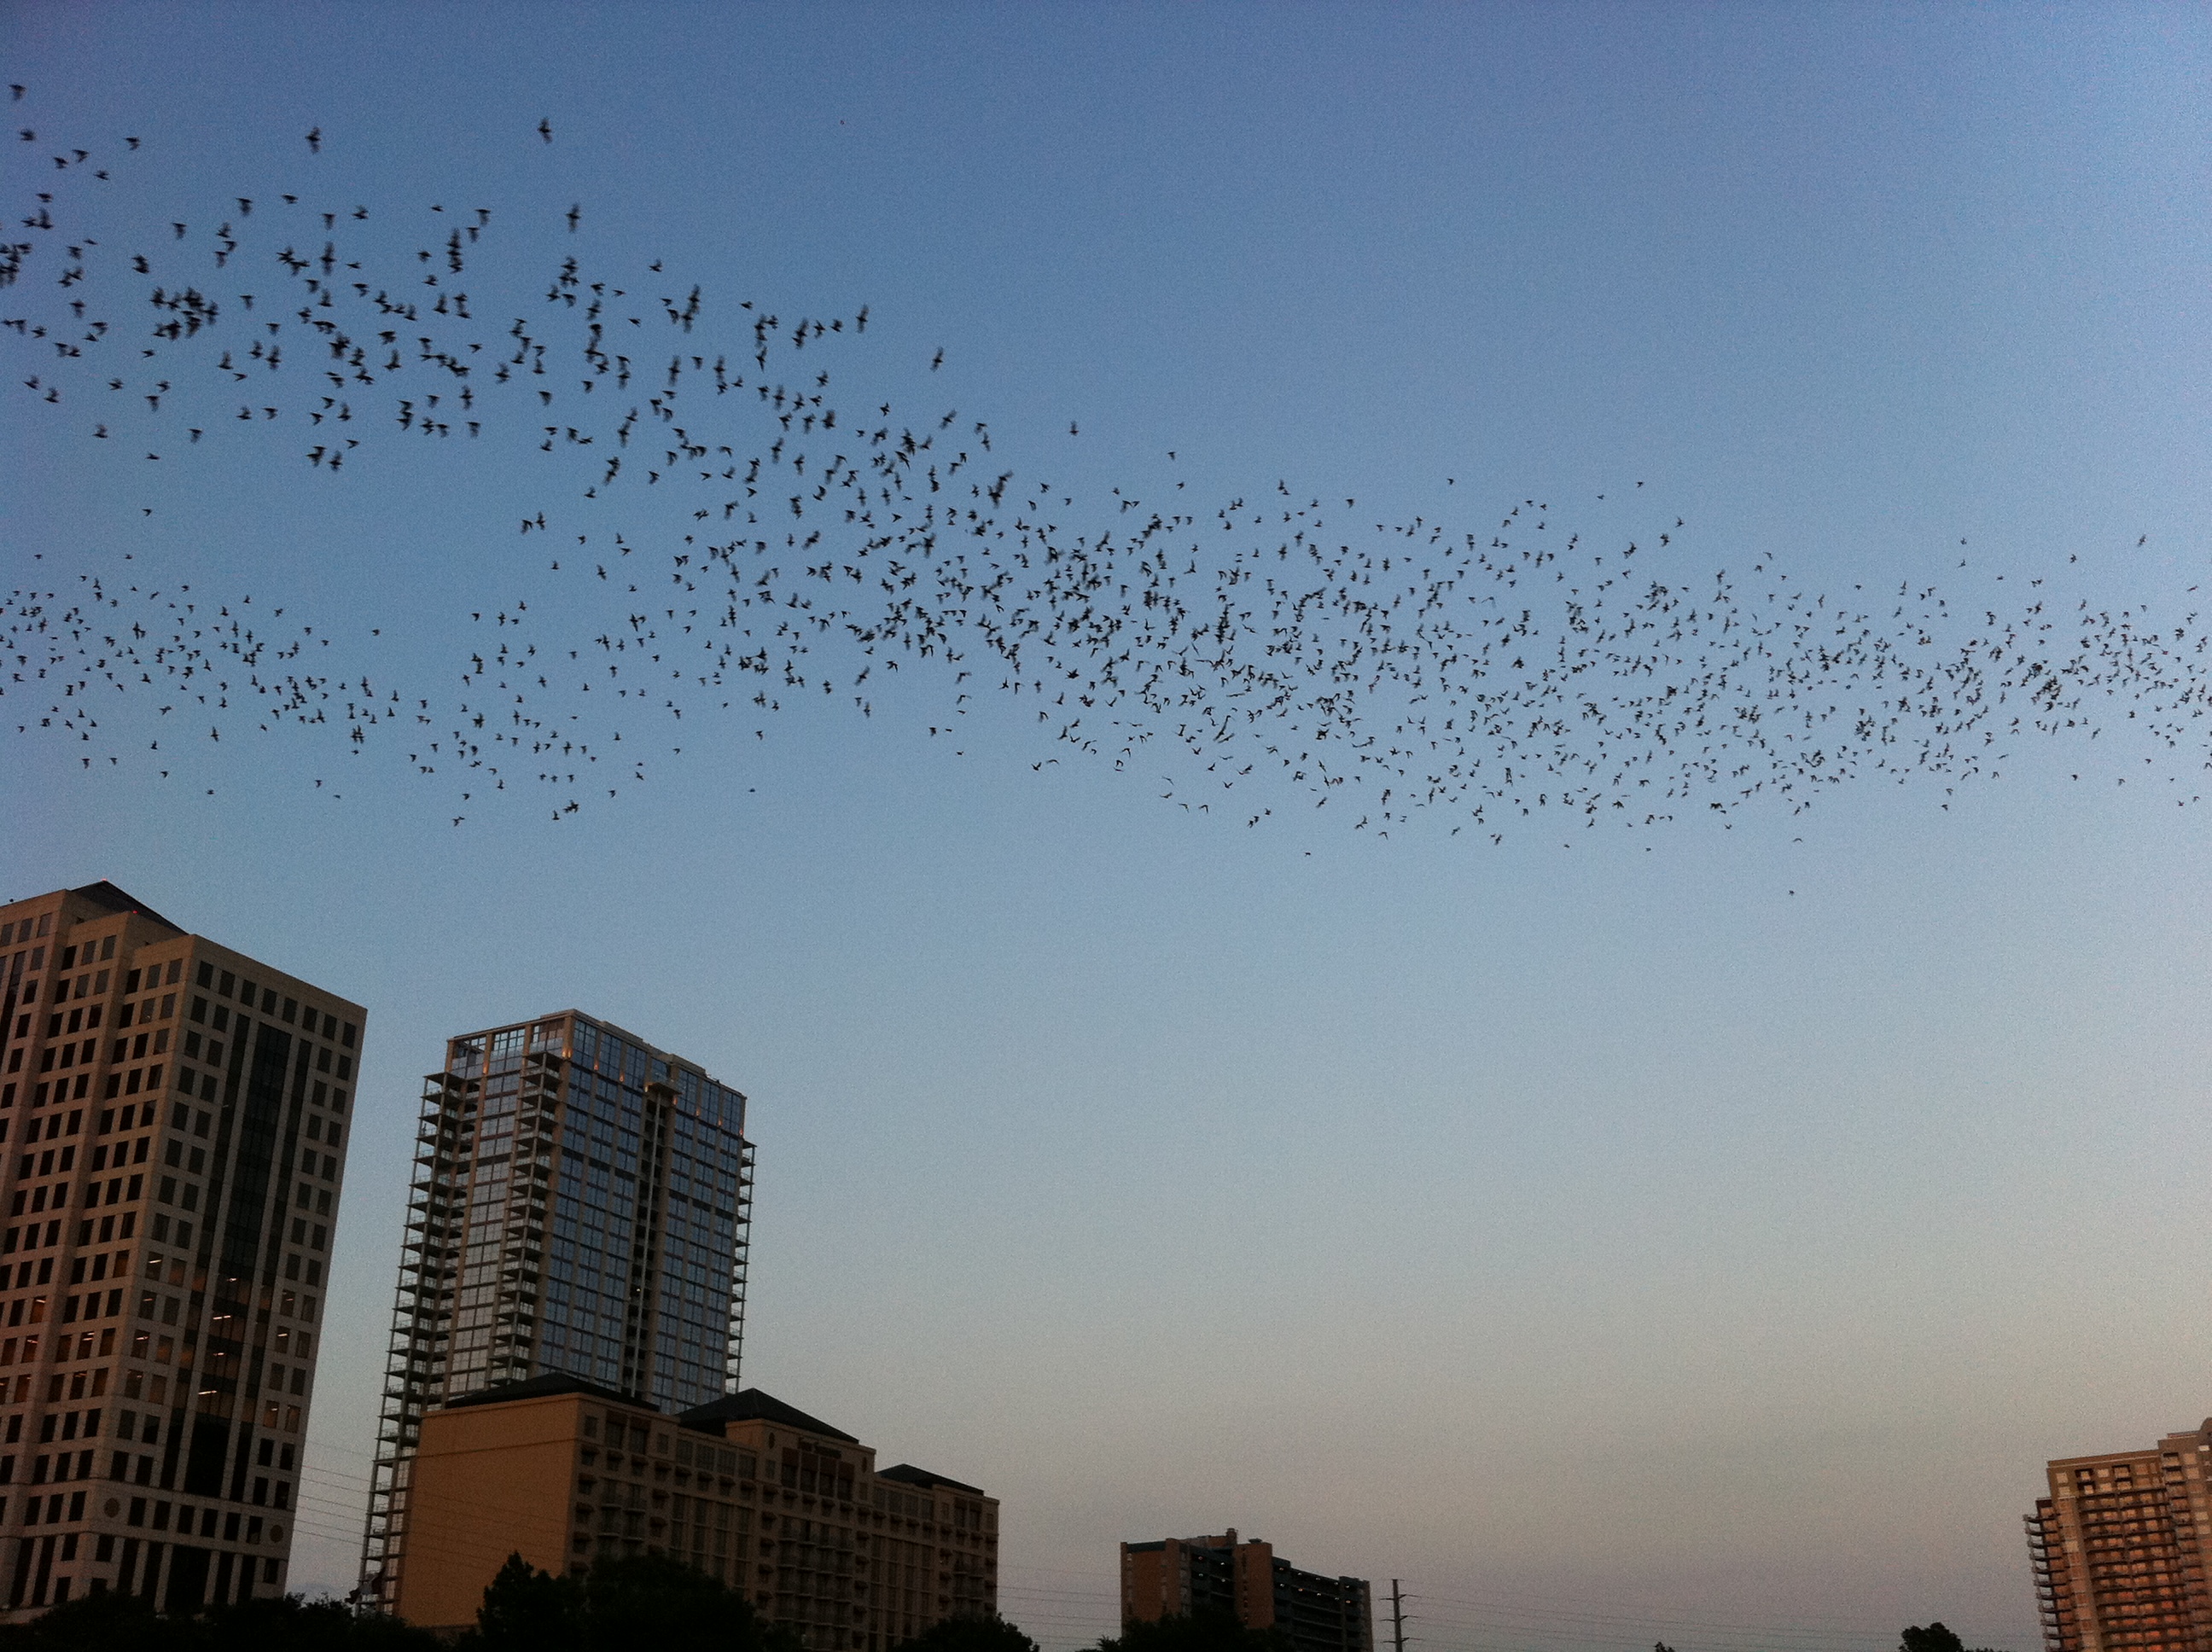 Congress Ave. Bridge bats were early this year